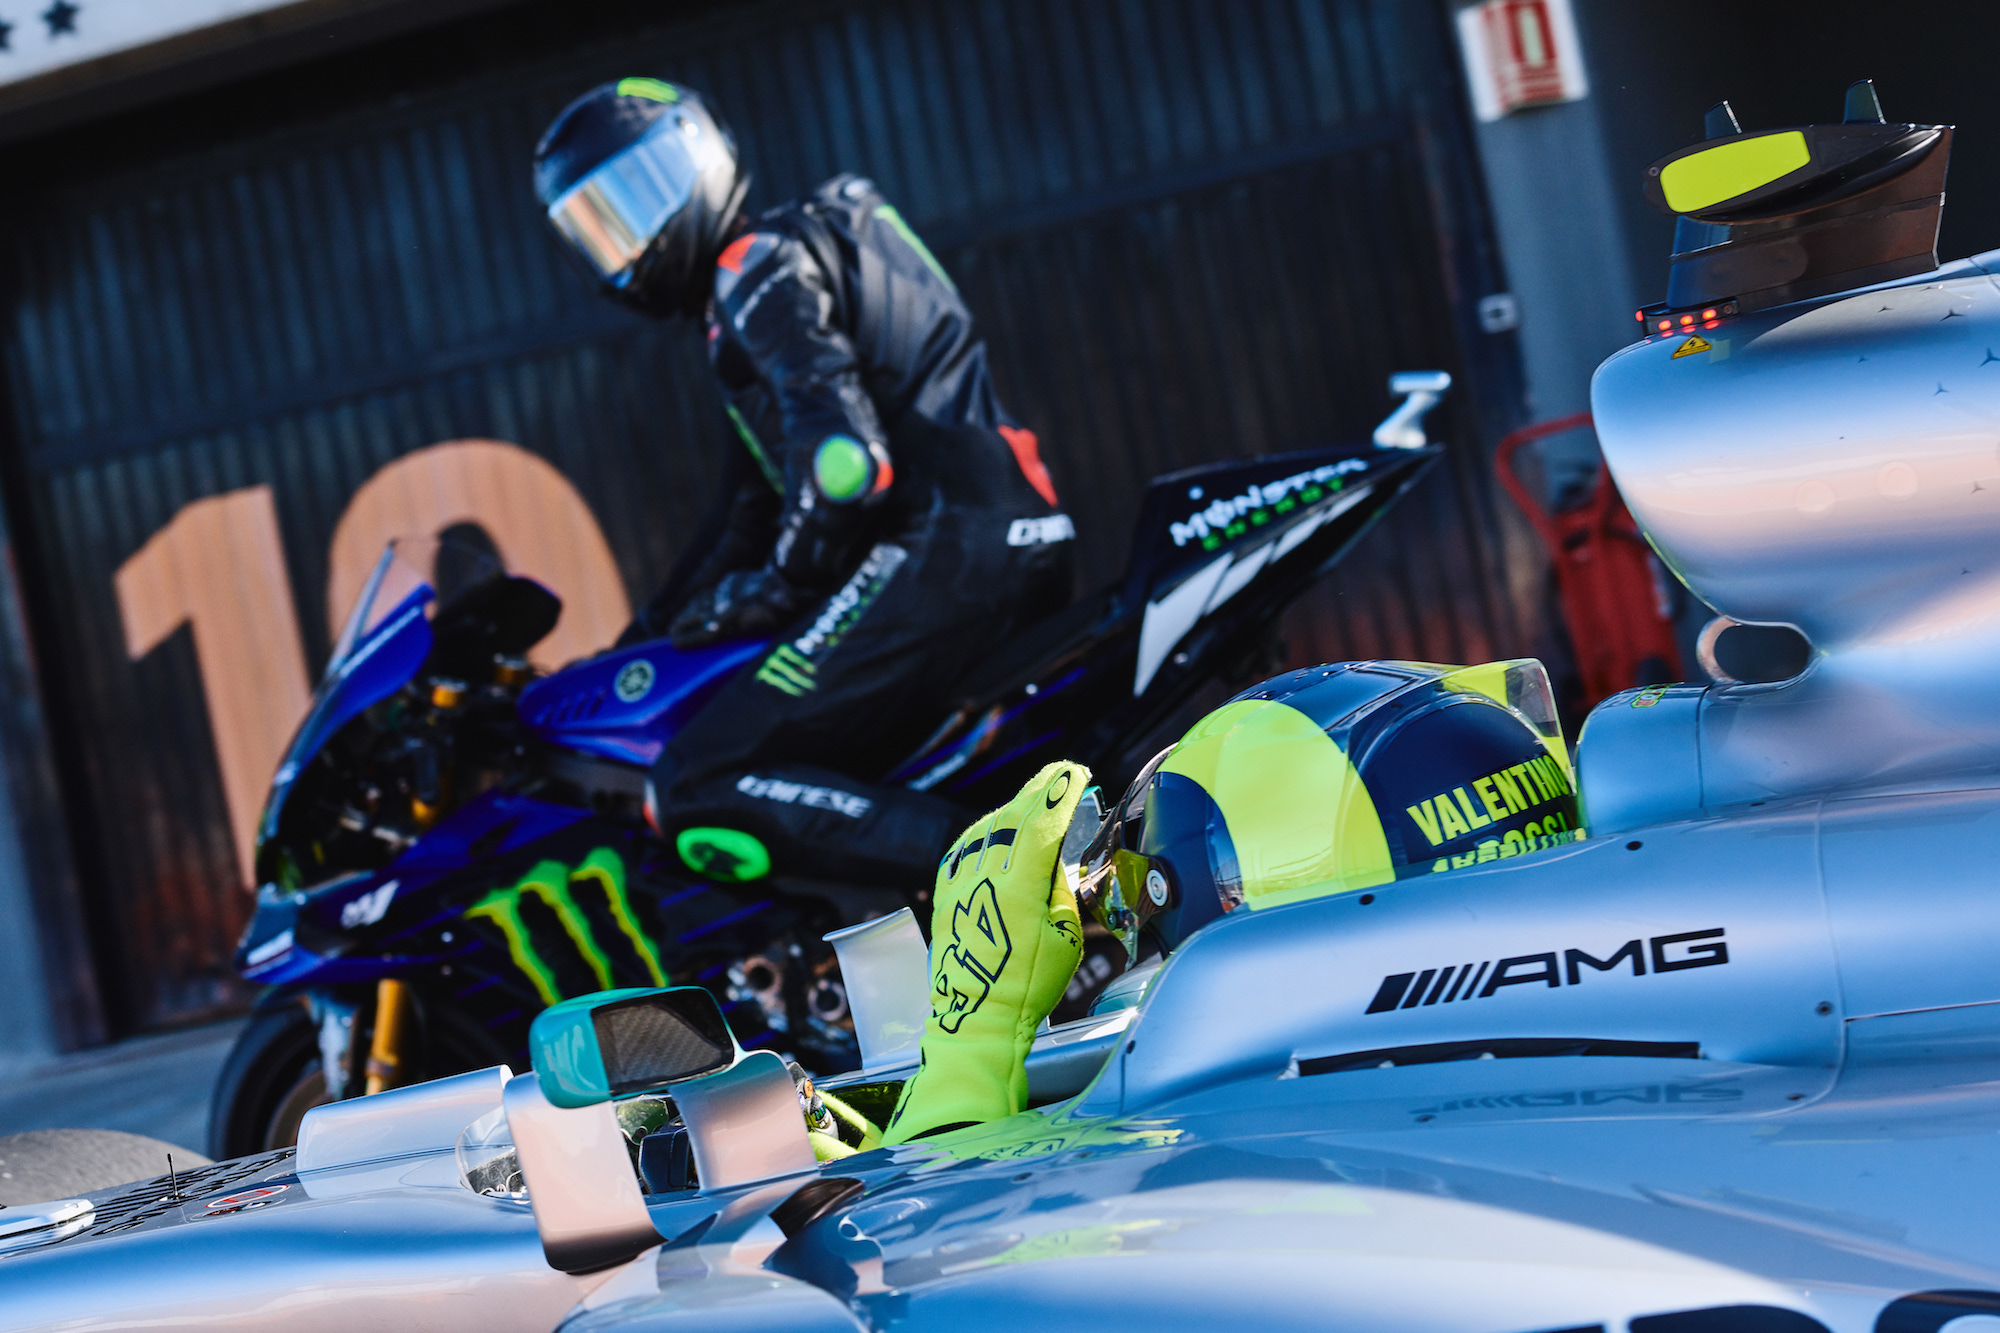 VALENCIA, SPAIN - DECEMBER 09: Atmosphere during the #LH44VR46 test at Ricardo Tormo circuit of Valencia on December 09, 2019 in Valencia, Spain.
Lewis Hamilton and Valentino Rossi swapped their respective machinery in an unprecedented test between two motorsport icons.
Photo by Guido De Bortoli/Getty Images for Monster Energy)